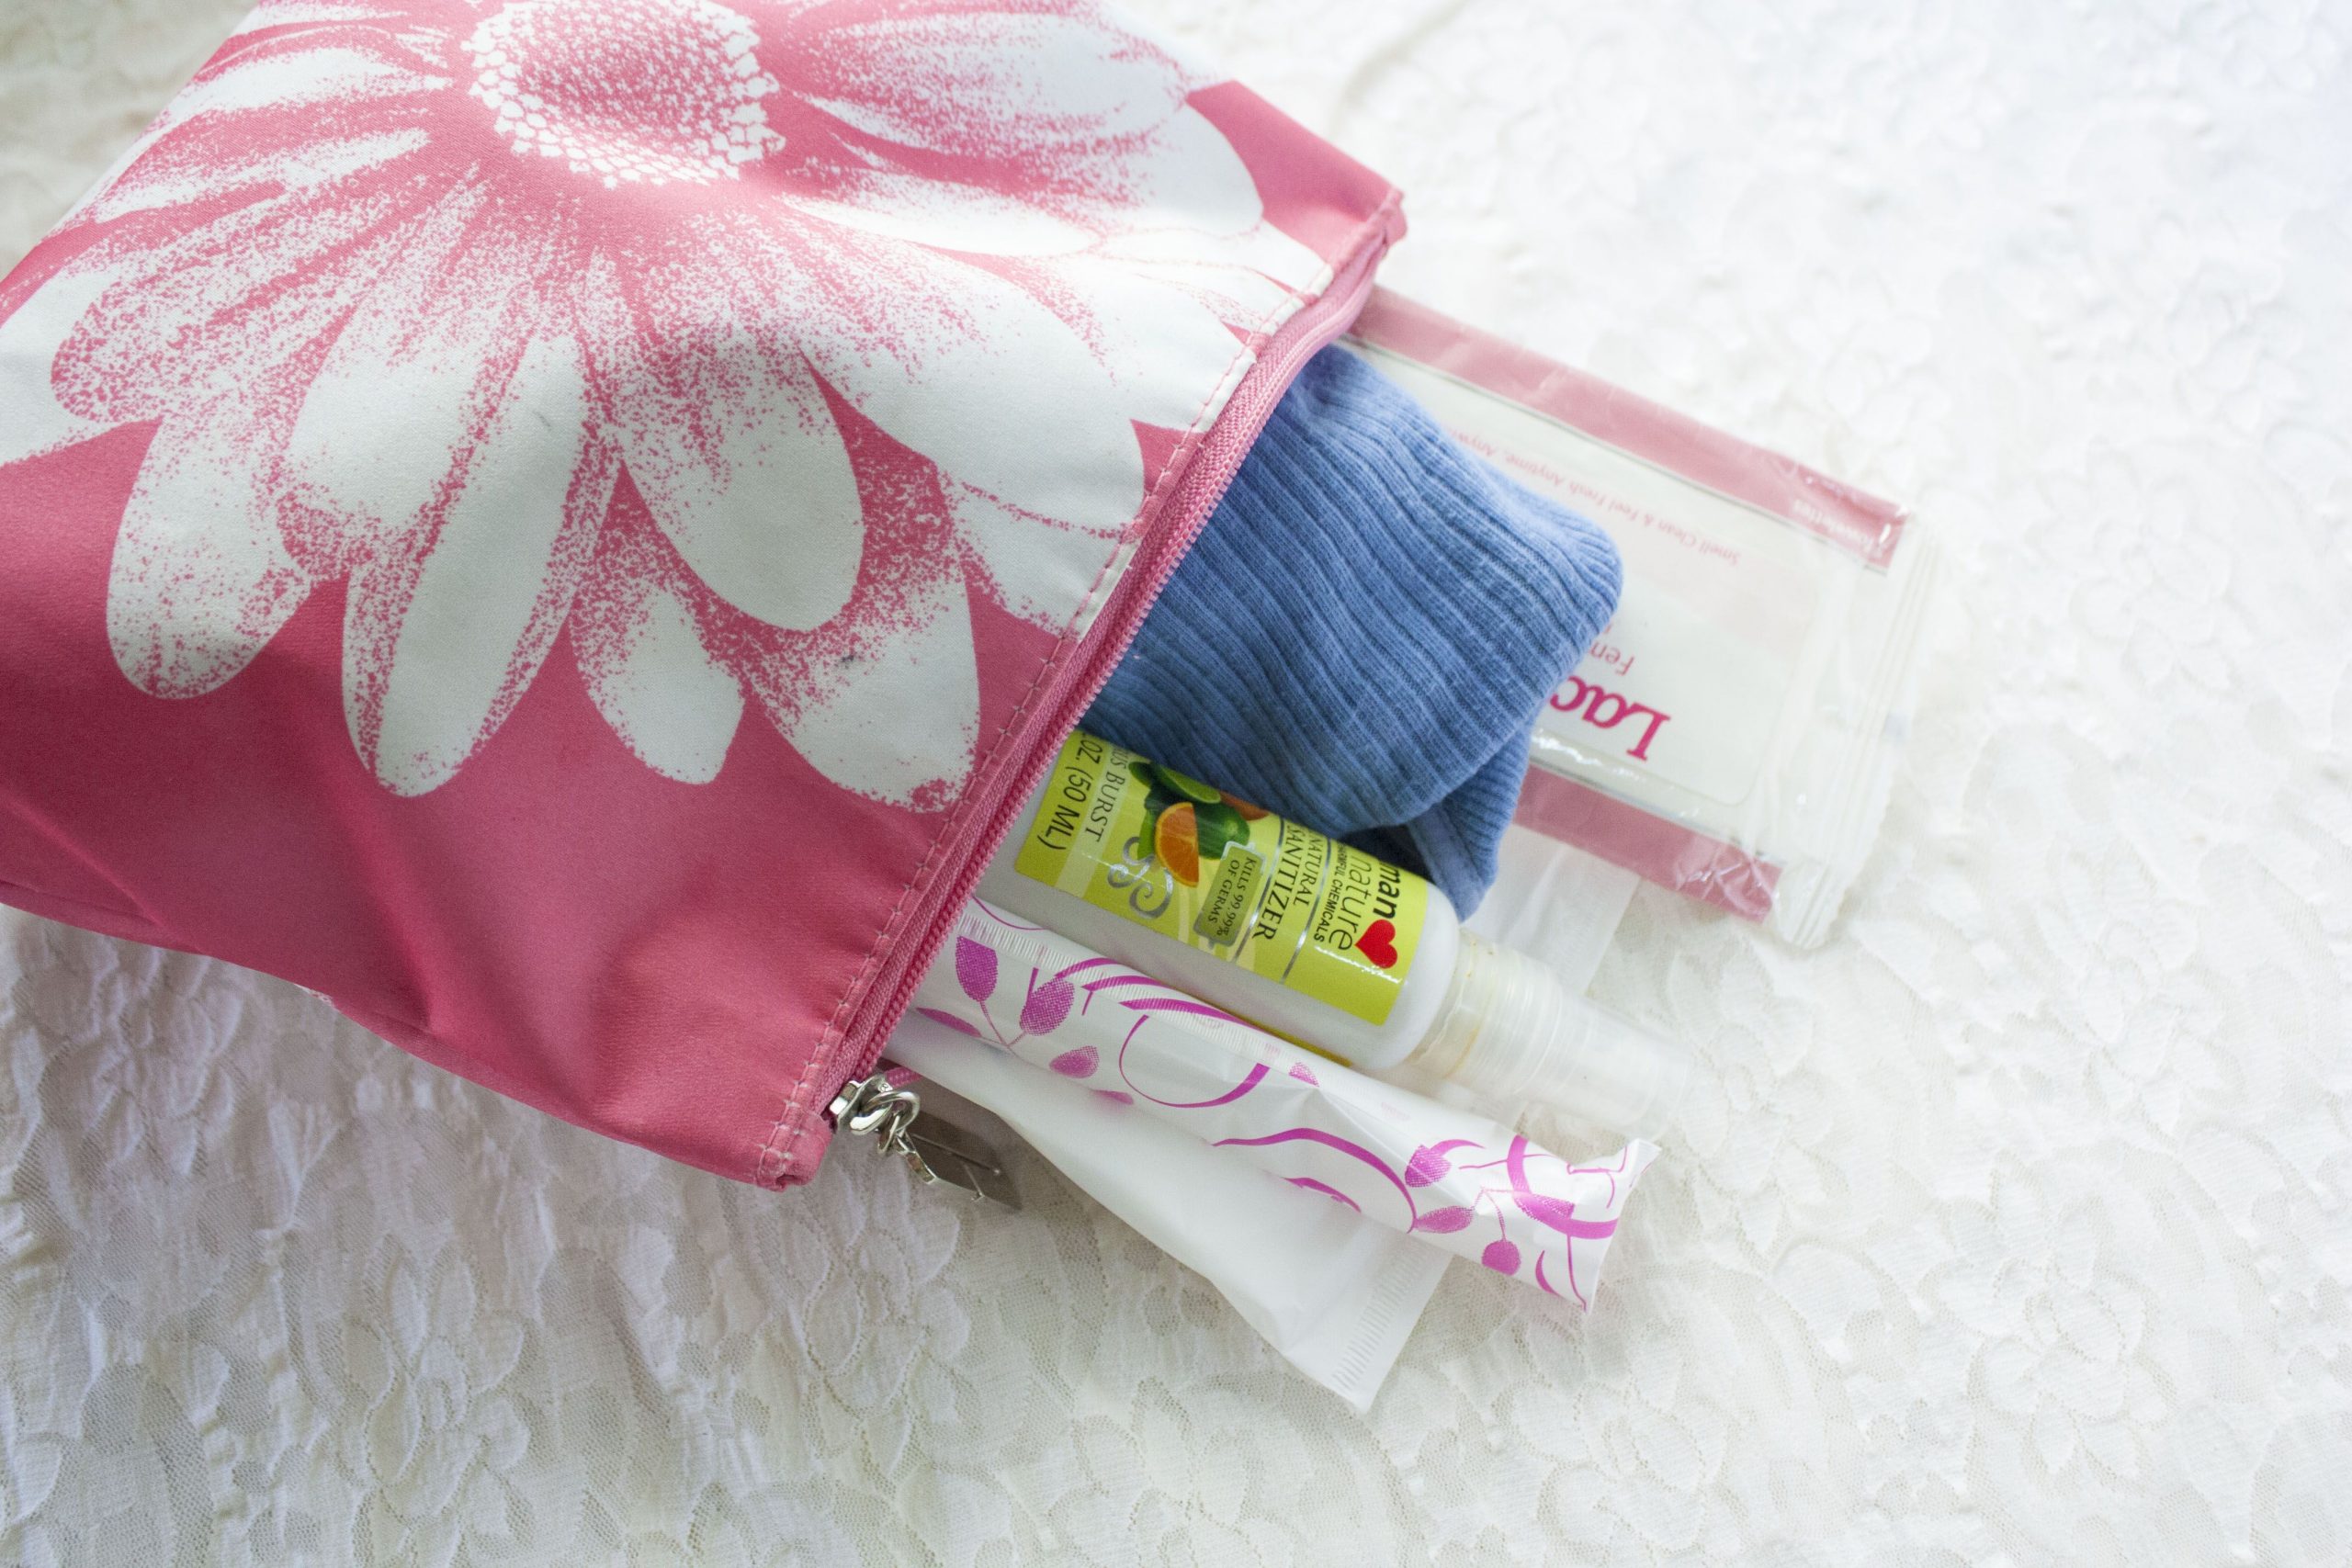 How to Make a Period Kit